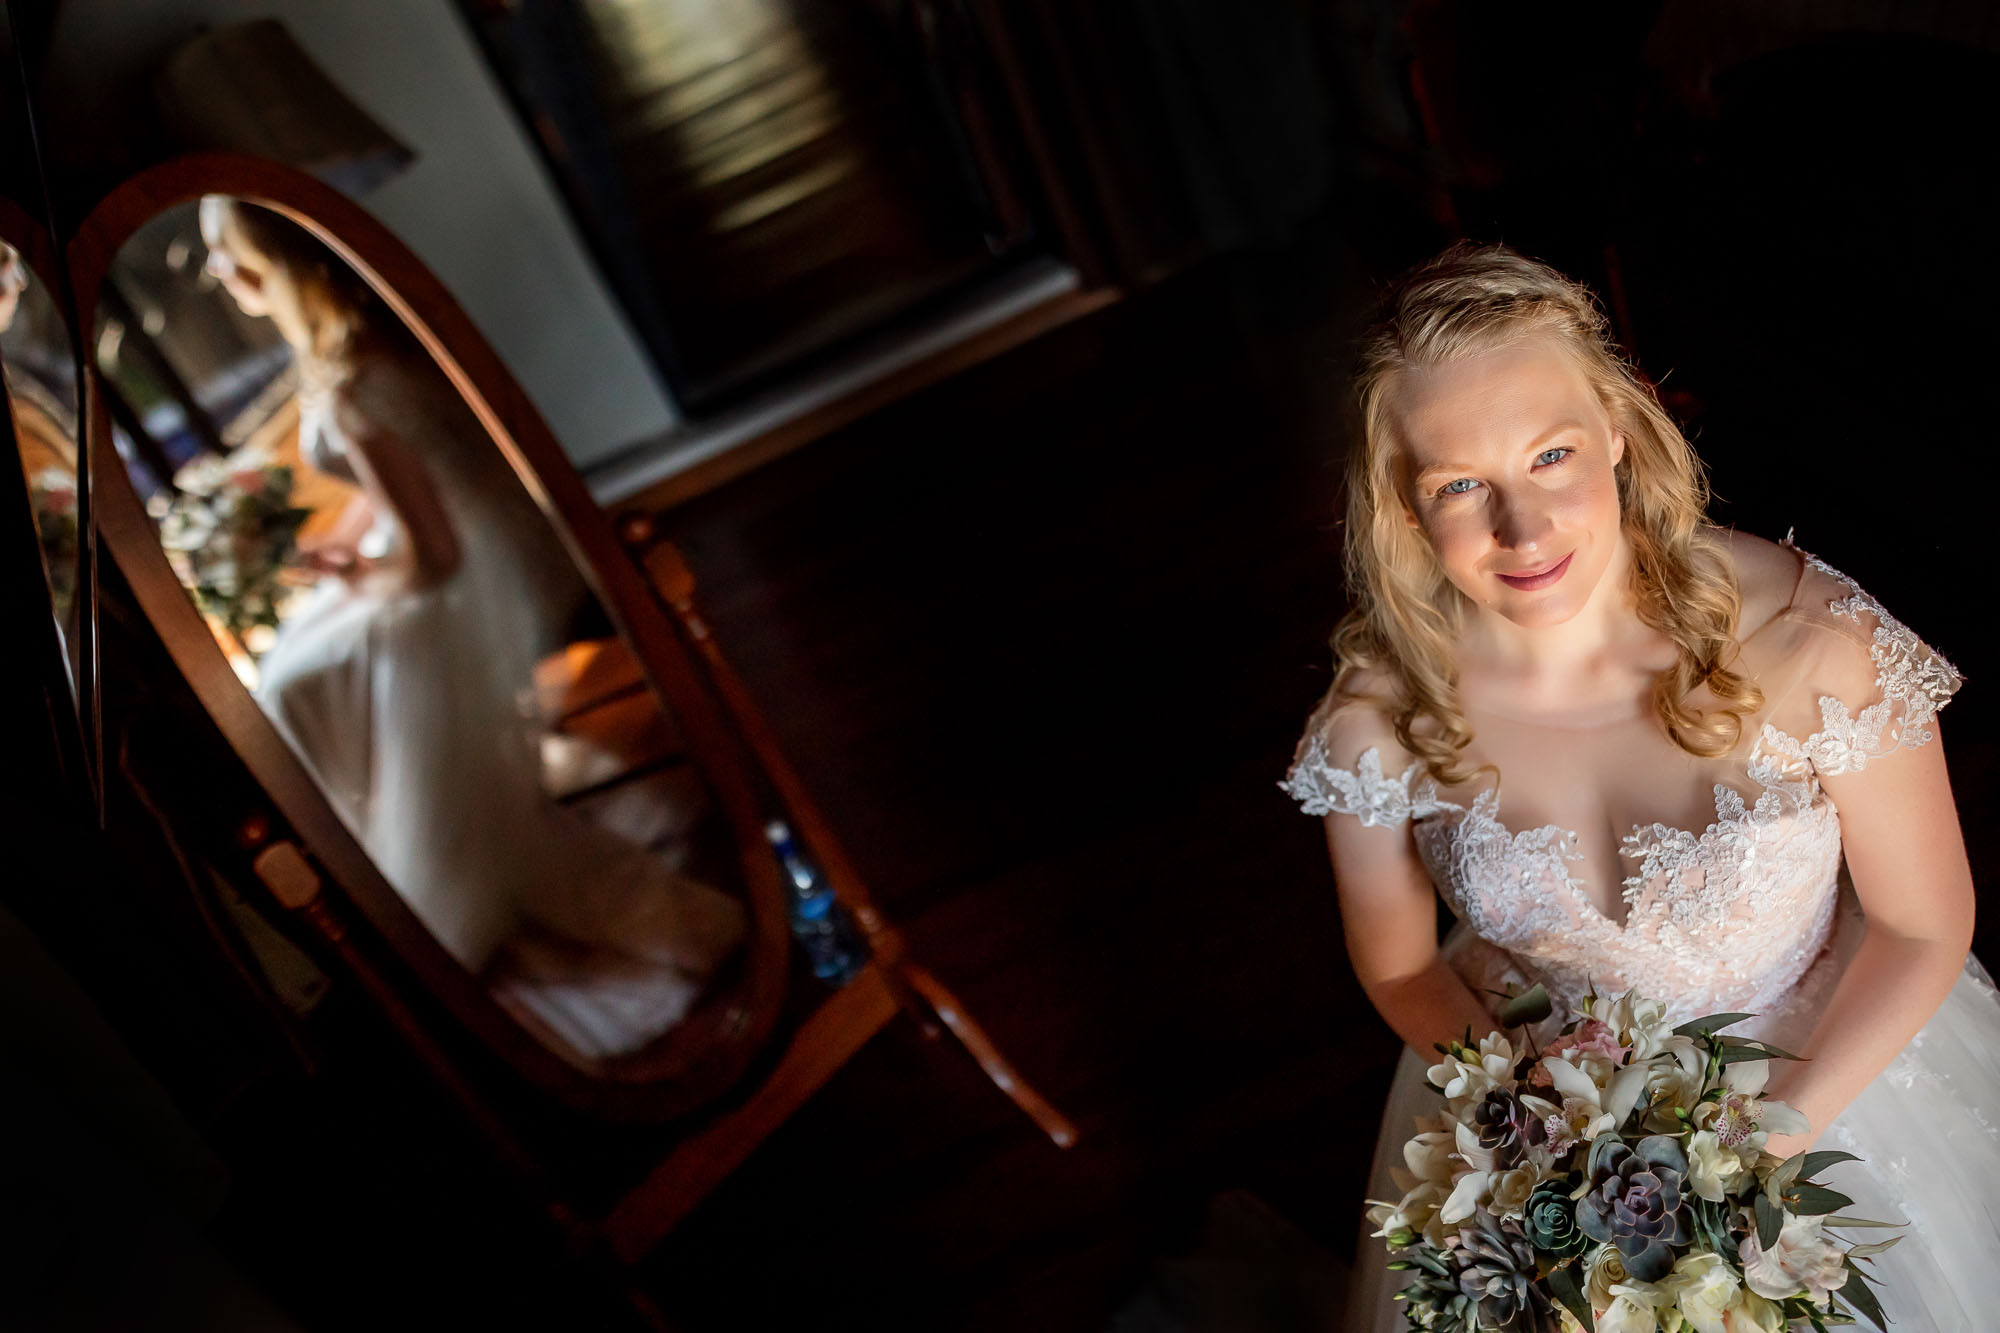 Creative wedding shot from above with the bride reflected in the mirror behind her